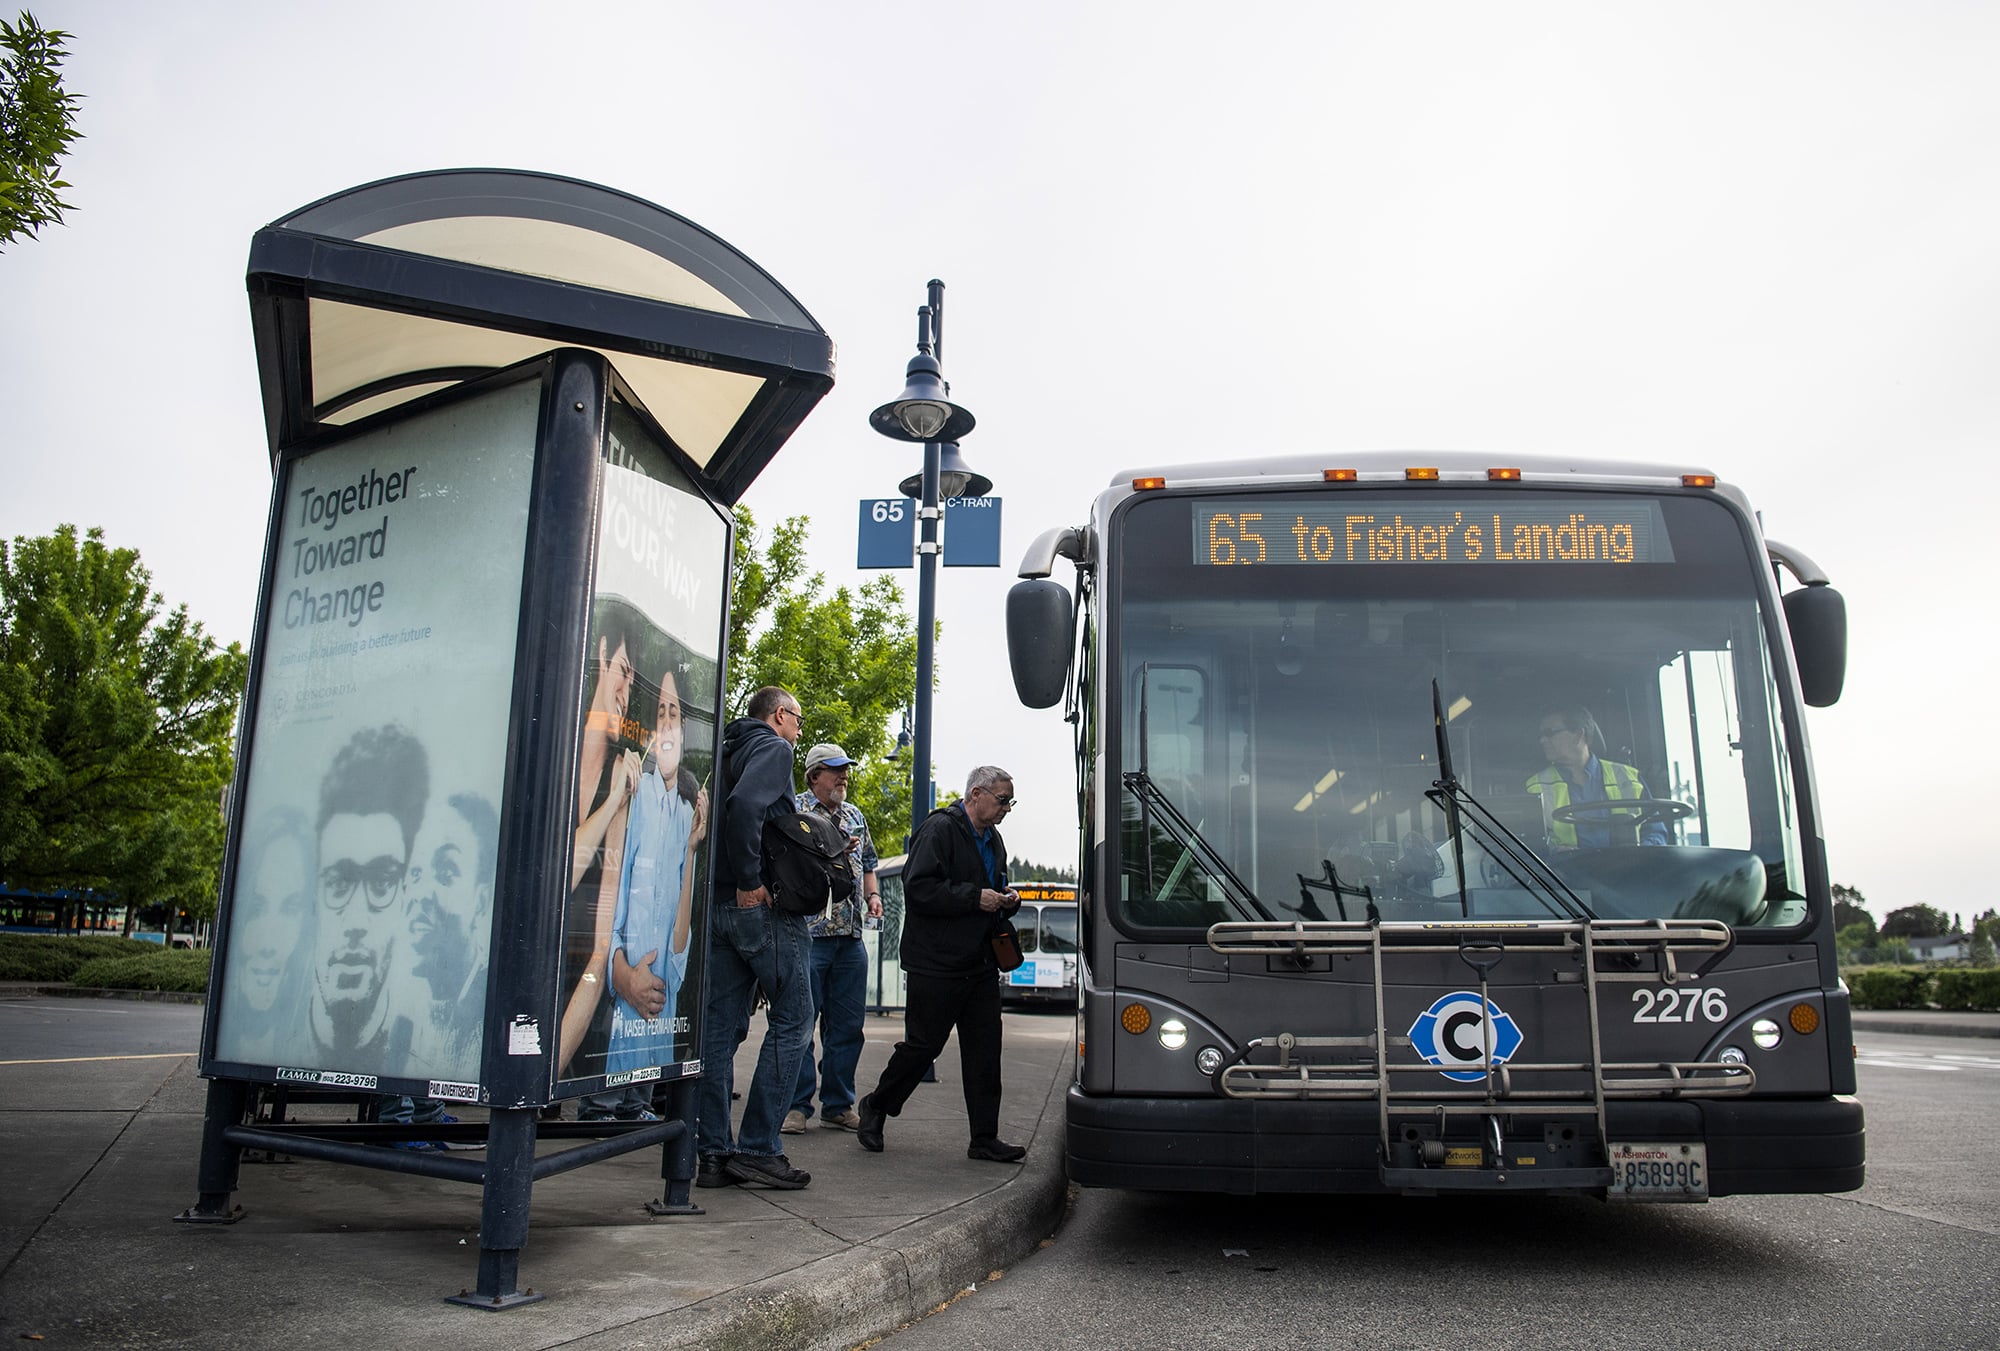 Passengers board the 65 route that travels to Fisher's Landing Transit Center in Vancouver at the Parkrose/ Sumner Transit Center in Portland, Ore., on Monday evening, May 13, 2019.